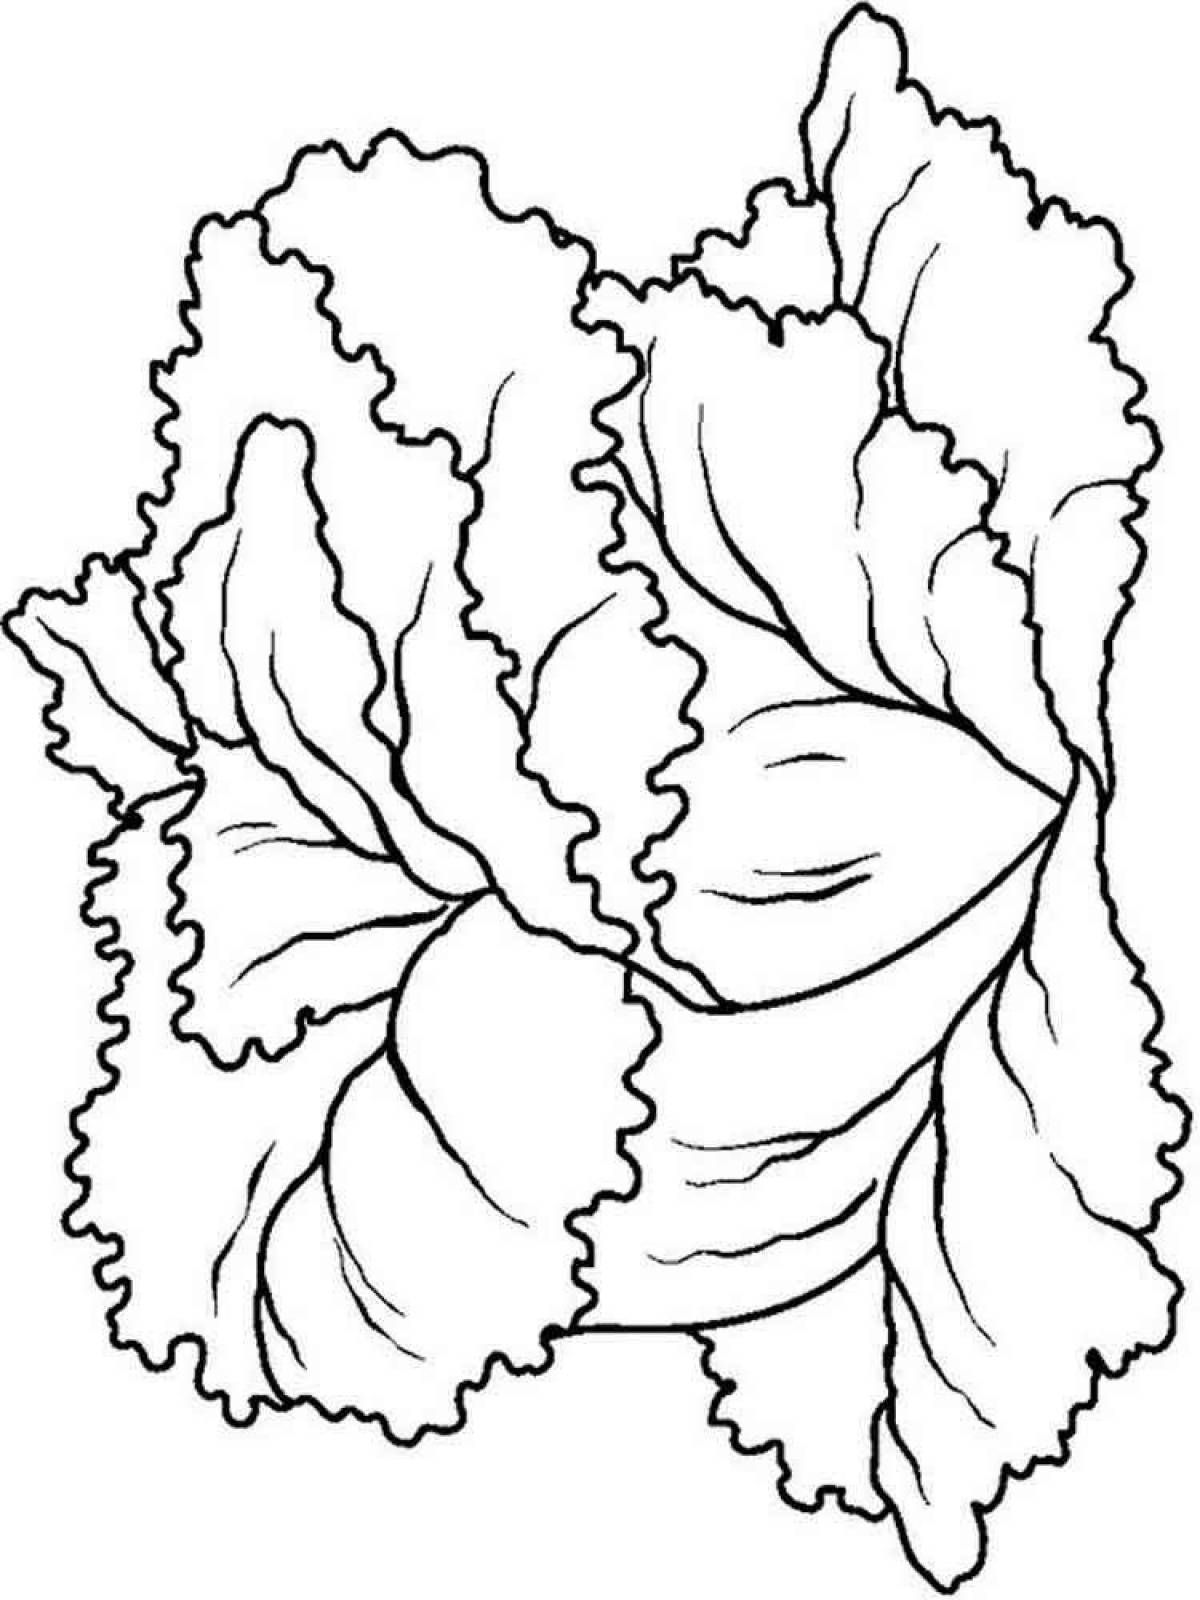 Colorful lettuce coloring page